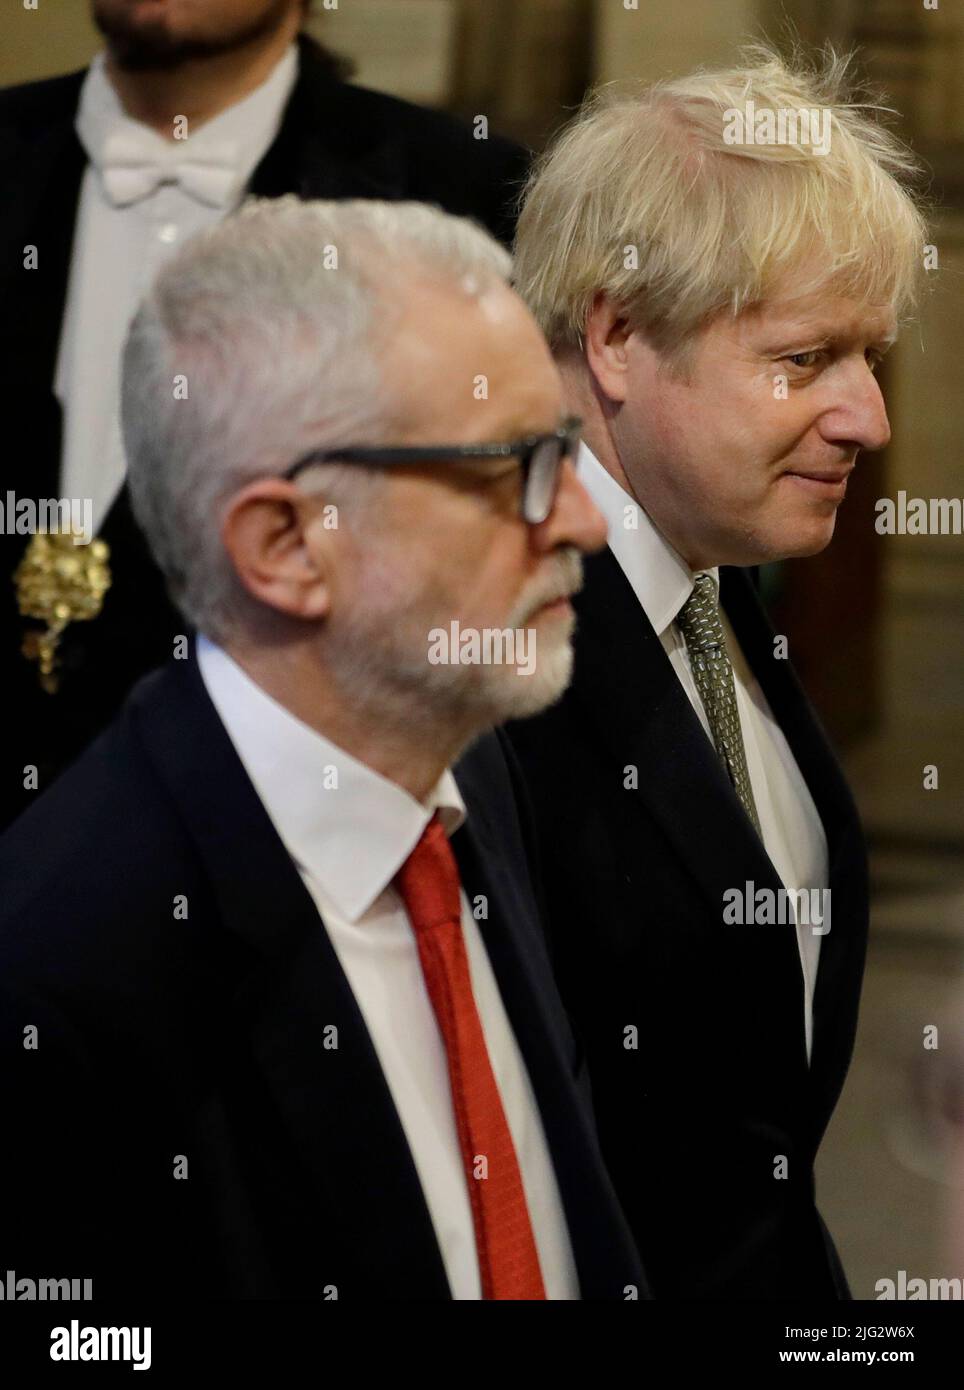 File photo dated 19/19/19 of Prime Minister Boris Johnson and the then opposition Labour Party Leader Jeremy Corbyn walk through the Members' Lobby in the House of Commons during the State Opening of Parliament by Queen Elizabeth II, at the Palace of Westminster in London. Boris Johnson will publicly announce his resignation later today, likely before lunchtime, the BBC is reporting. Issue date: Thursday July 7, 2022. Stock Photo